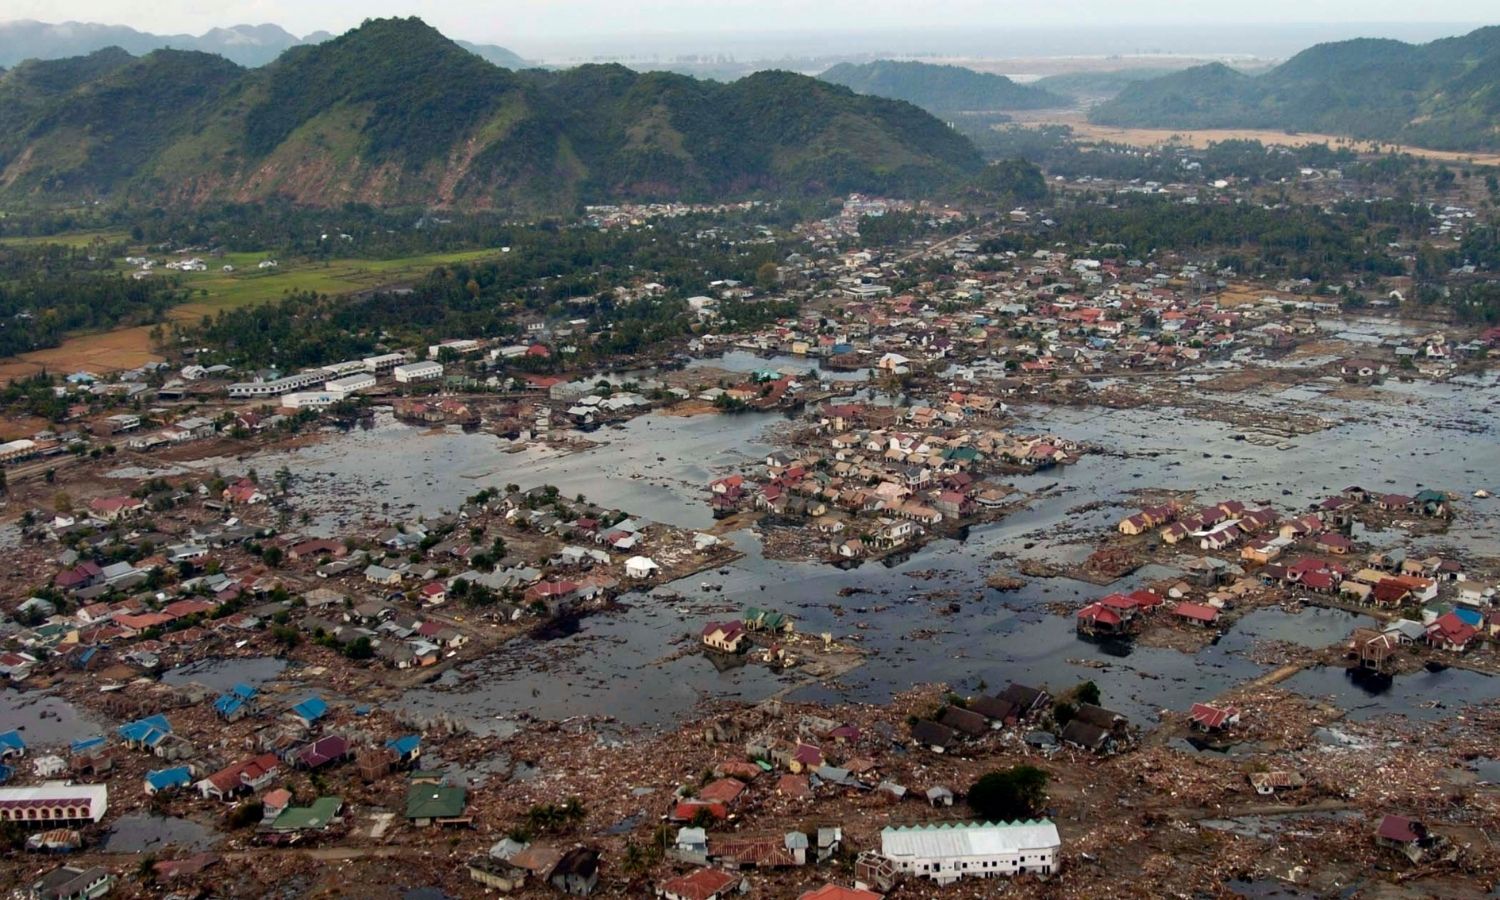 OTD in 2004: A devastating tsunami and earthquake occurred in the Indian Ocean.